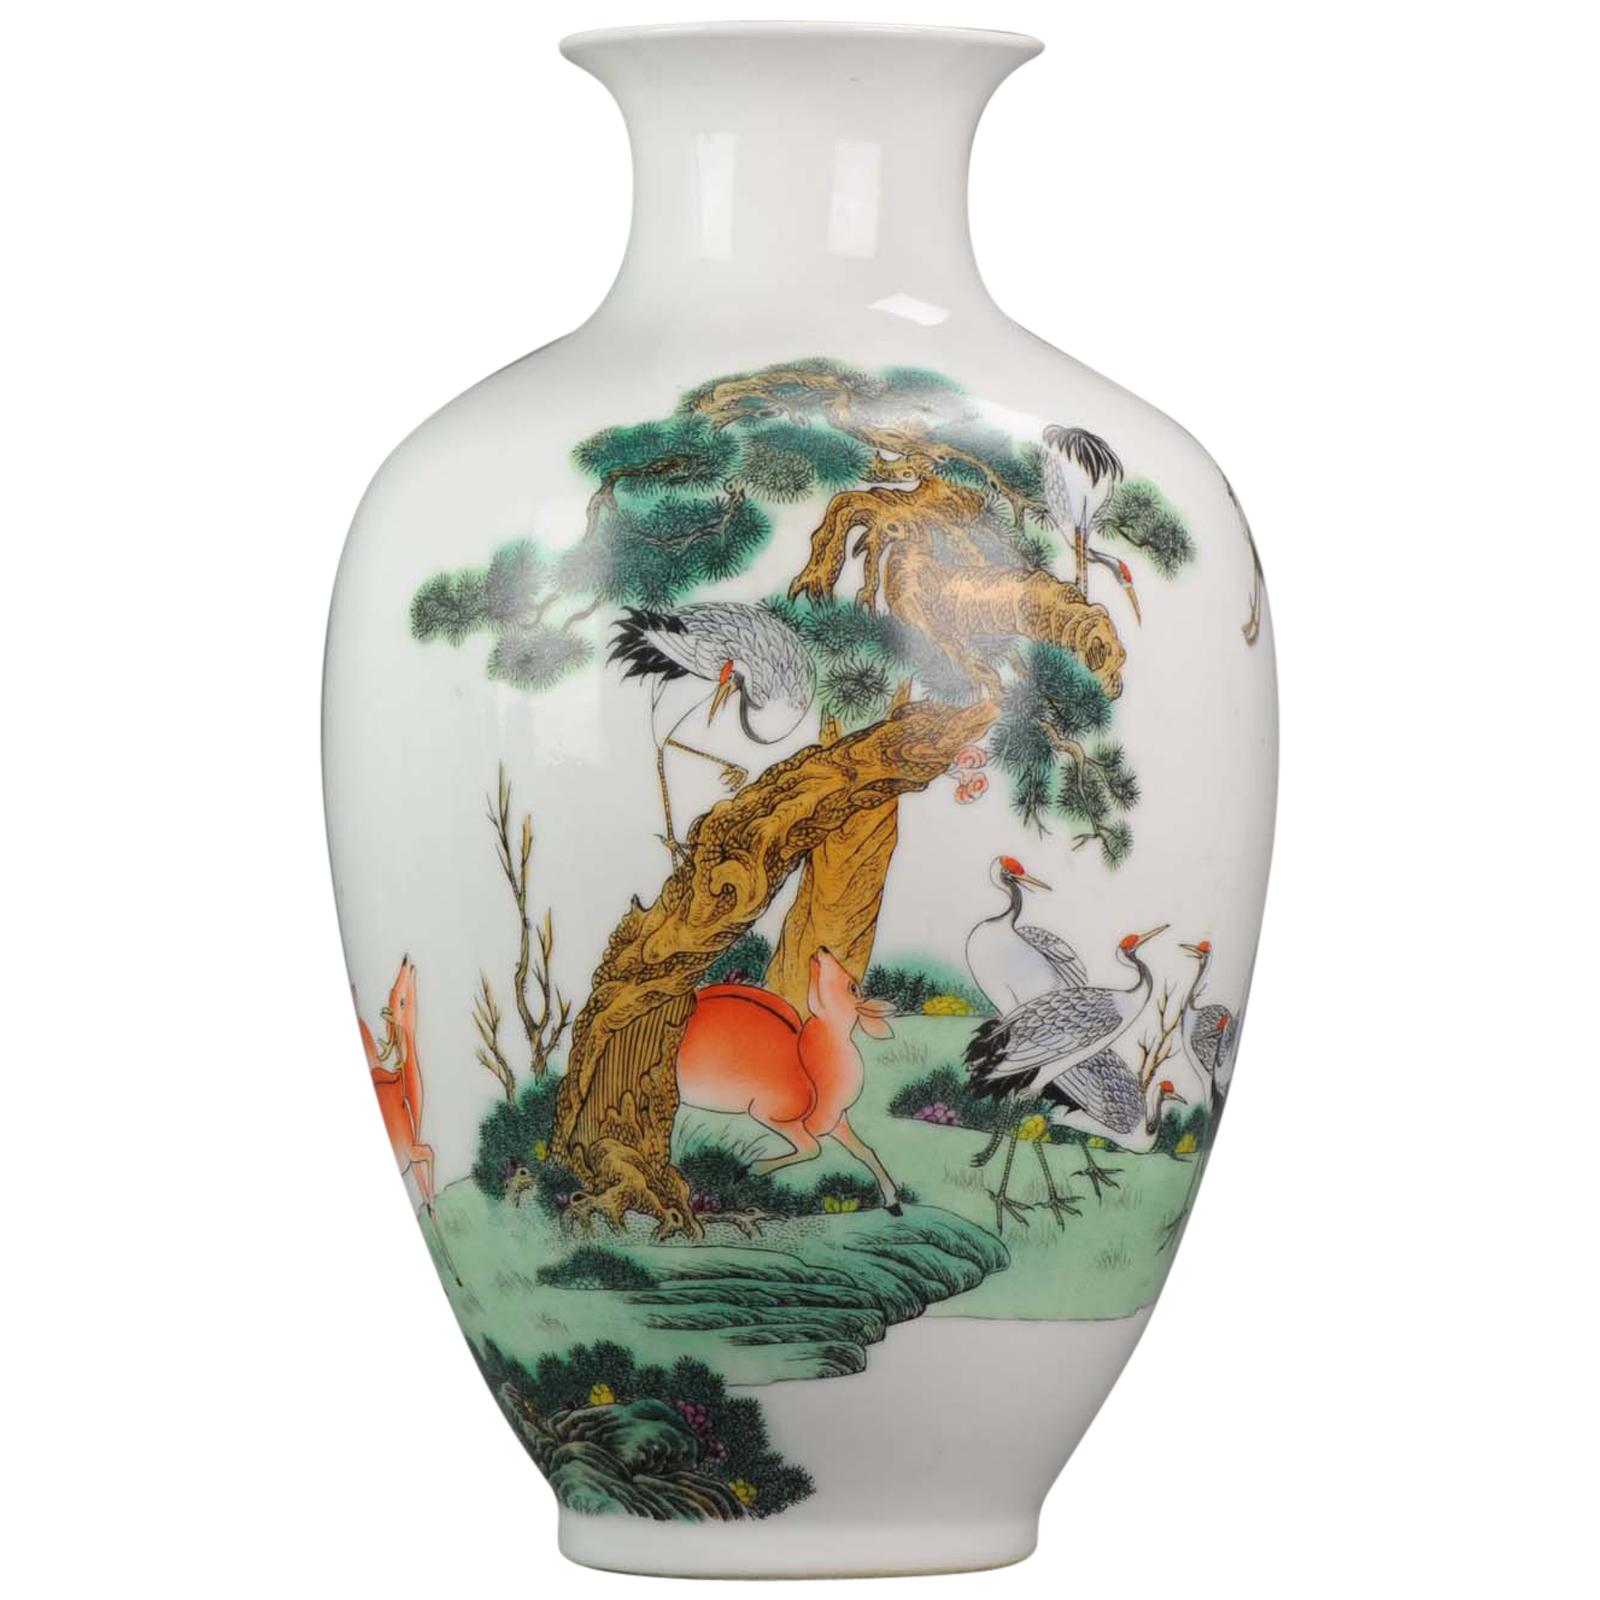 Late 20th Century PRoC Chinese Porcelain Vase with Cranes High quality